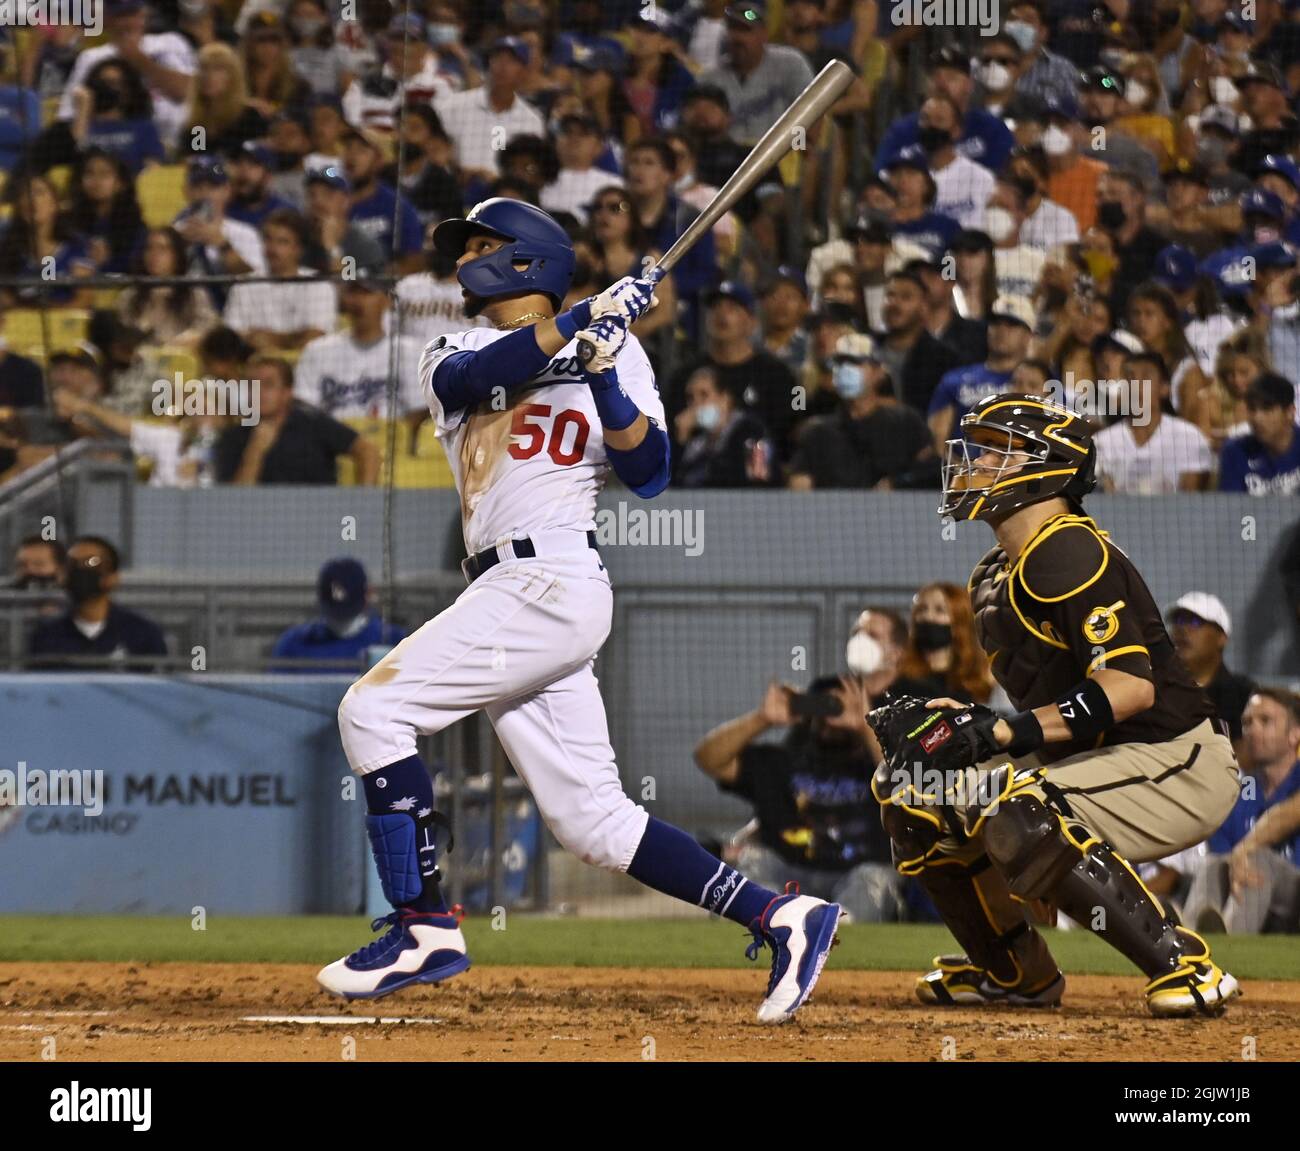 Los Angeles, United States. 12th Sep, 2021. Los Angeles Dodgers' Mookie Betts hits a three-run home run off San Diego Padres' reliever Craig Stammen in the fifth inning at Dodger Stadium in Los Angeles on Saturday, September 11, 2021. Photo by Jim Ruymen/UPI Credit: UPI/Alamy Live News Stock Photo